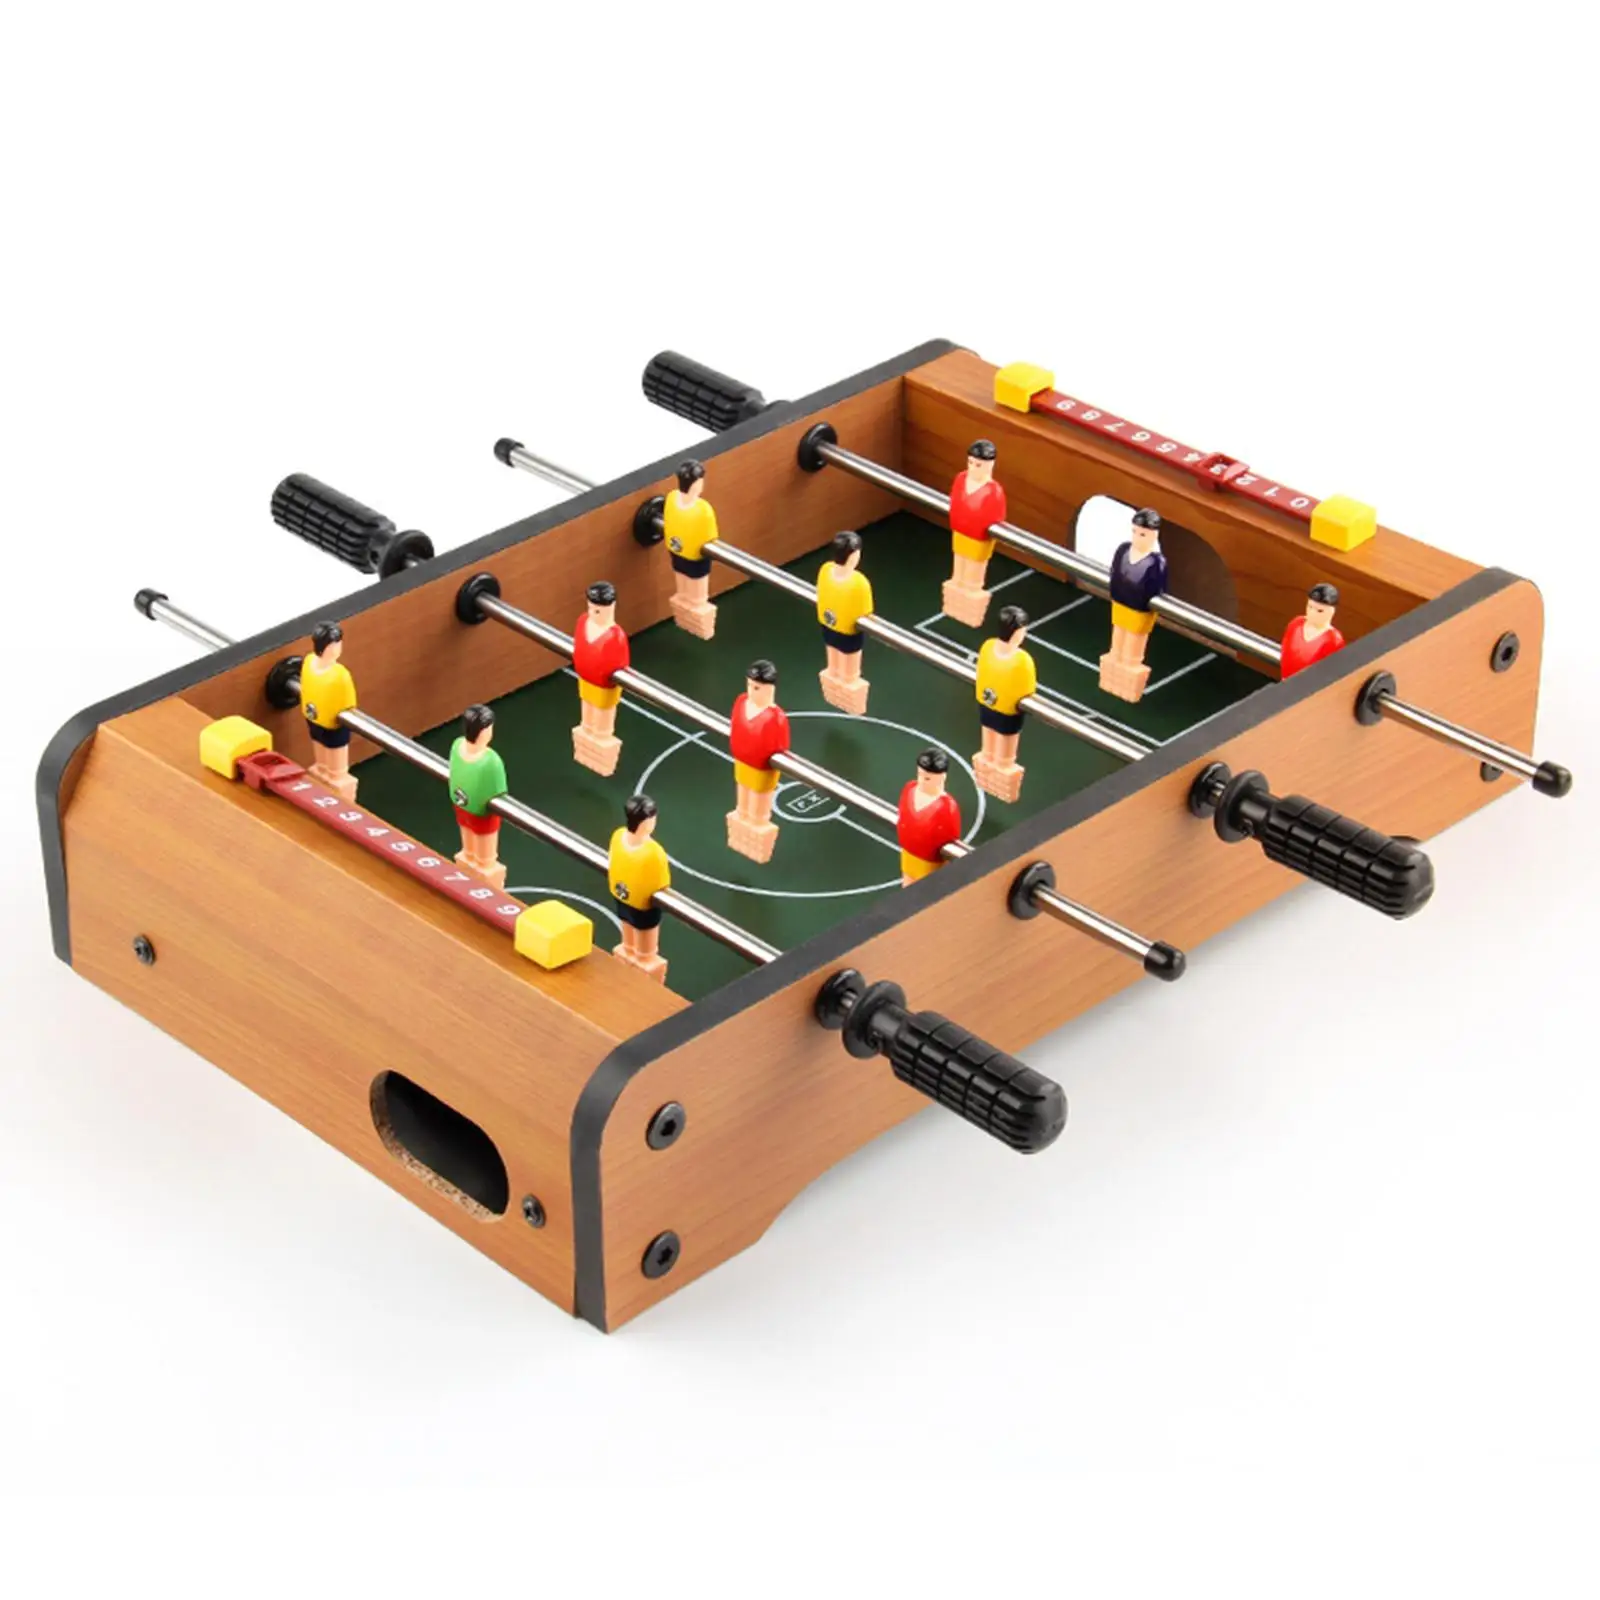 Table Top Foosball Table for Adults, Compact Mini Tabletop Soccer Game, Portable Recreational Hand Soccer for Game Room